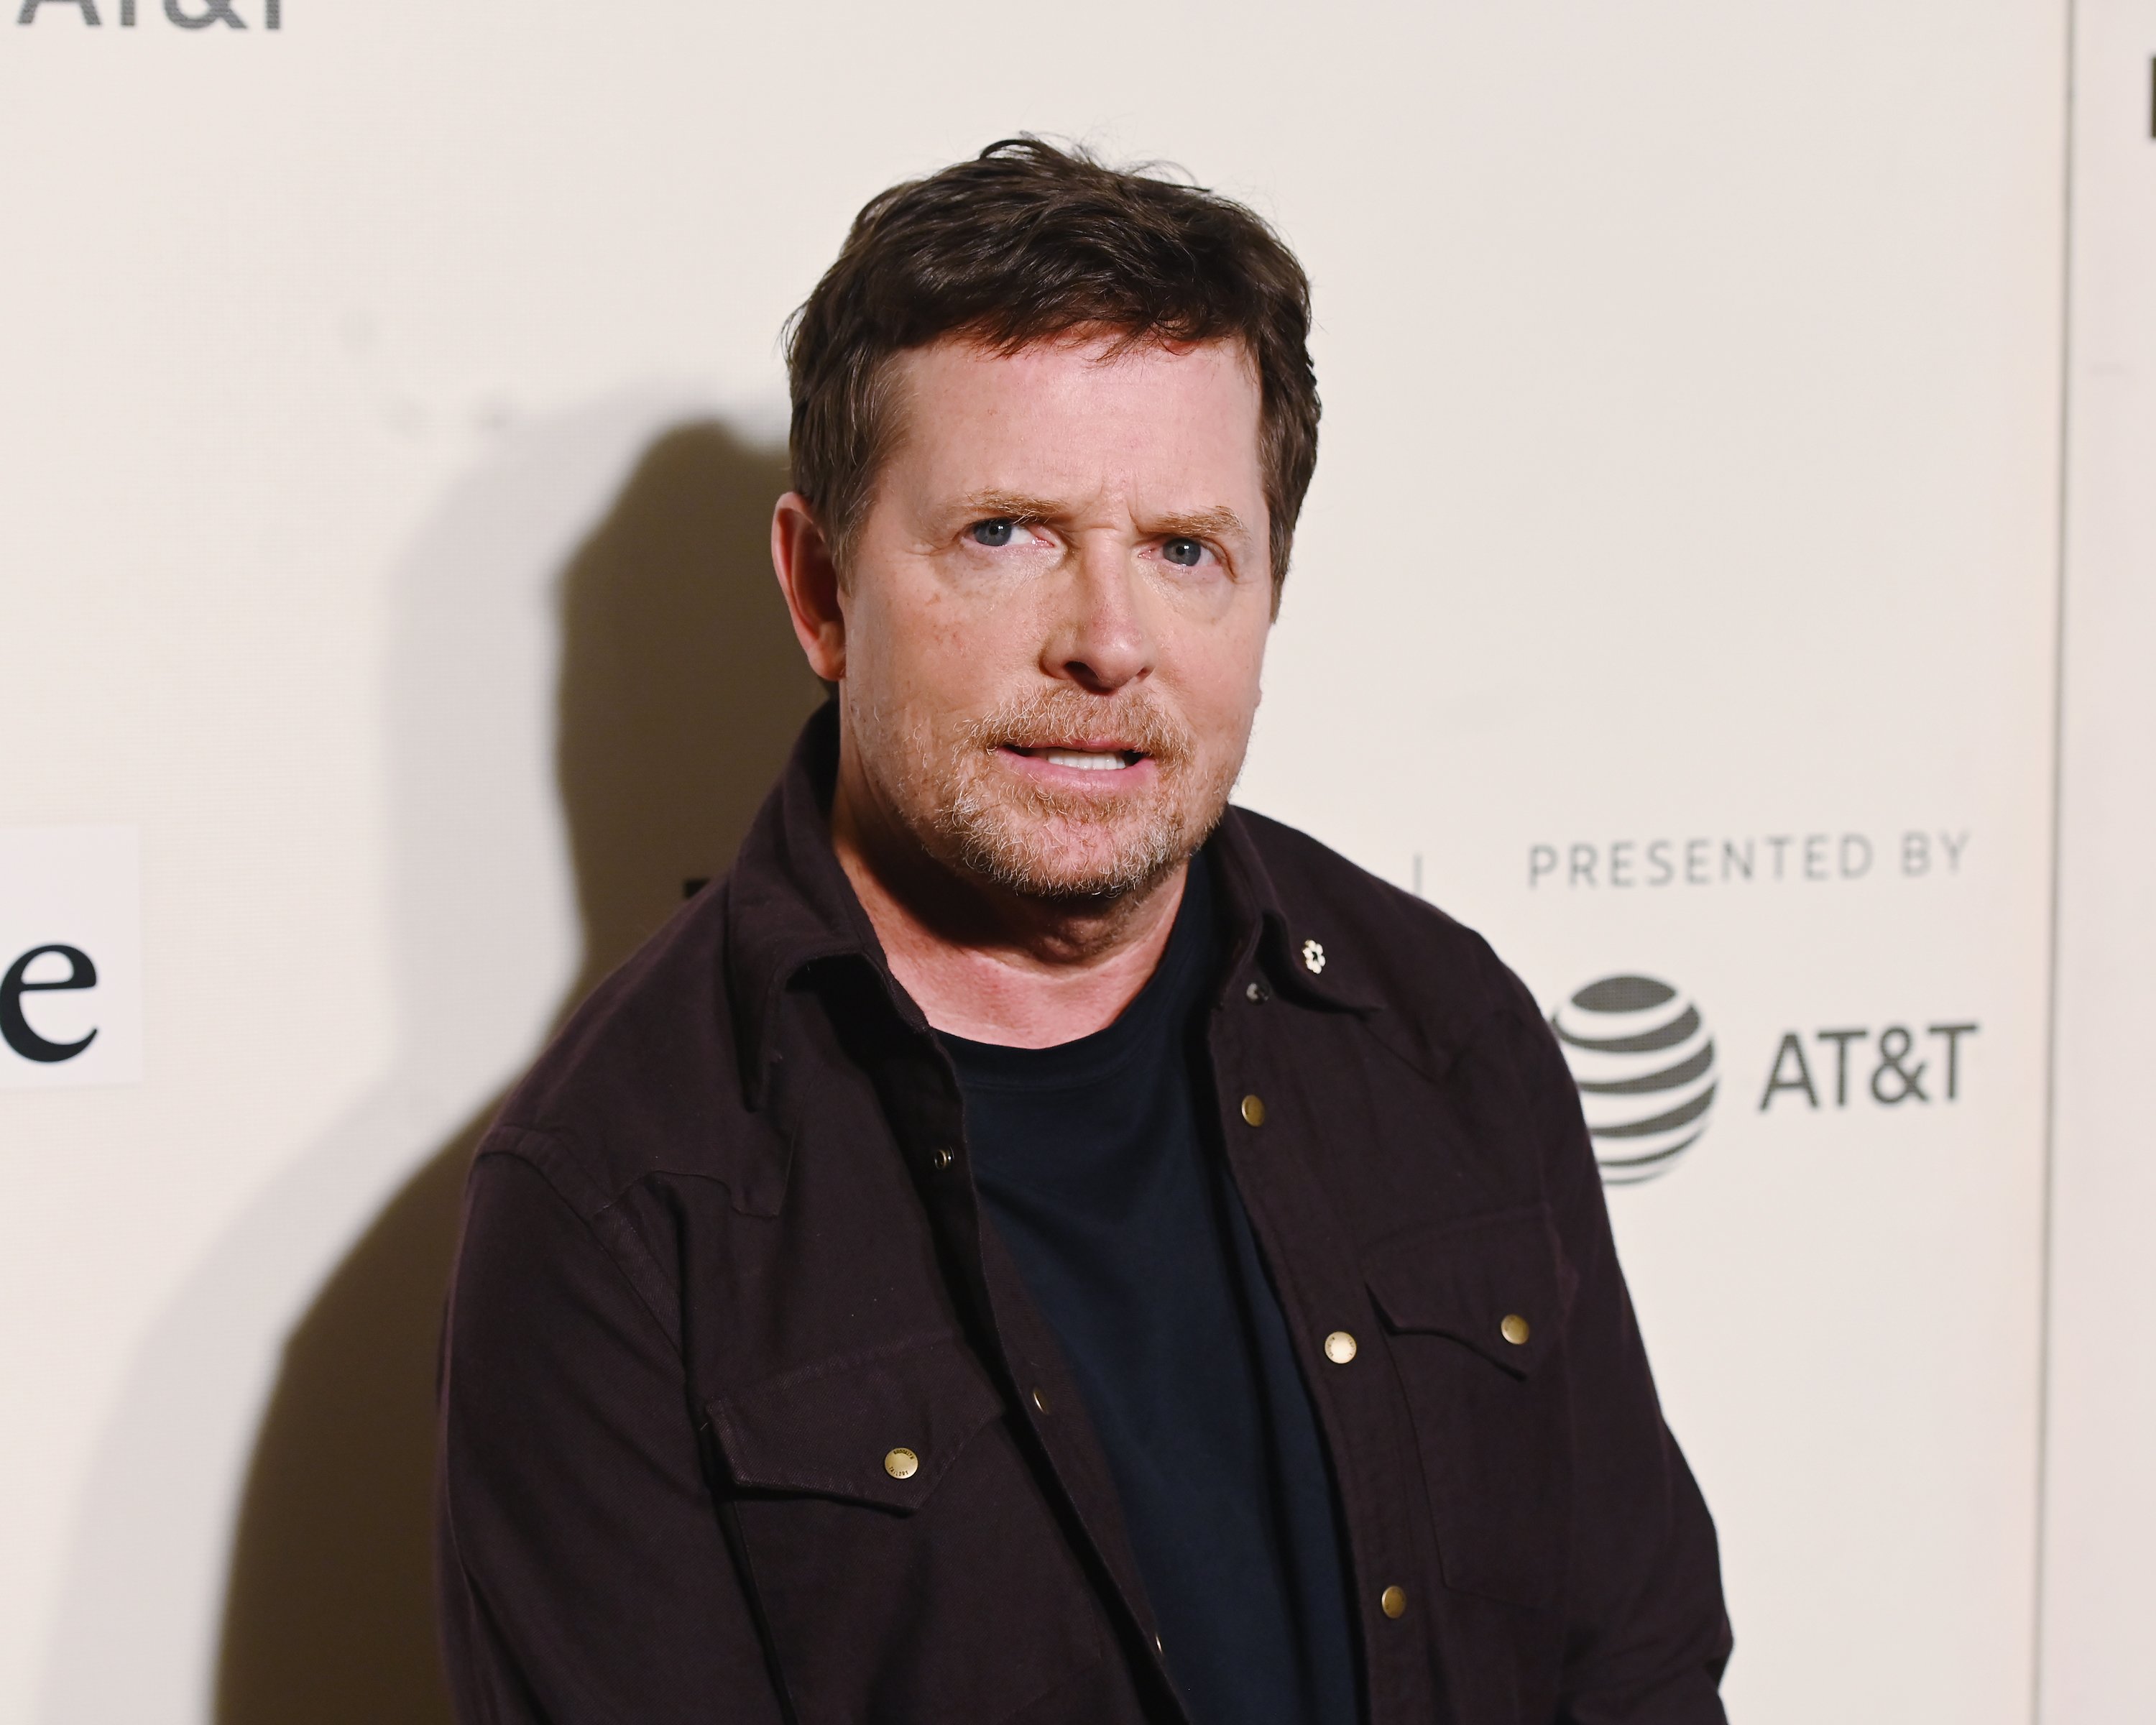 Michael J Fox pictured at red carpet for the Tribeca Talks - Storytellers - 2019 Tribeca Film Festival, 2019, New York City. | Photo: Getty Images